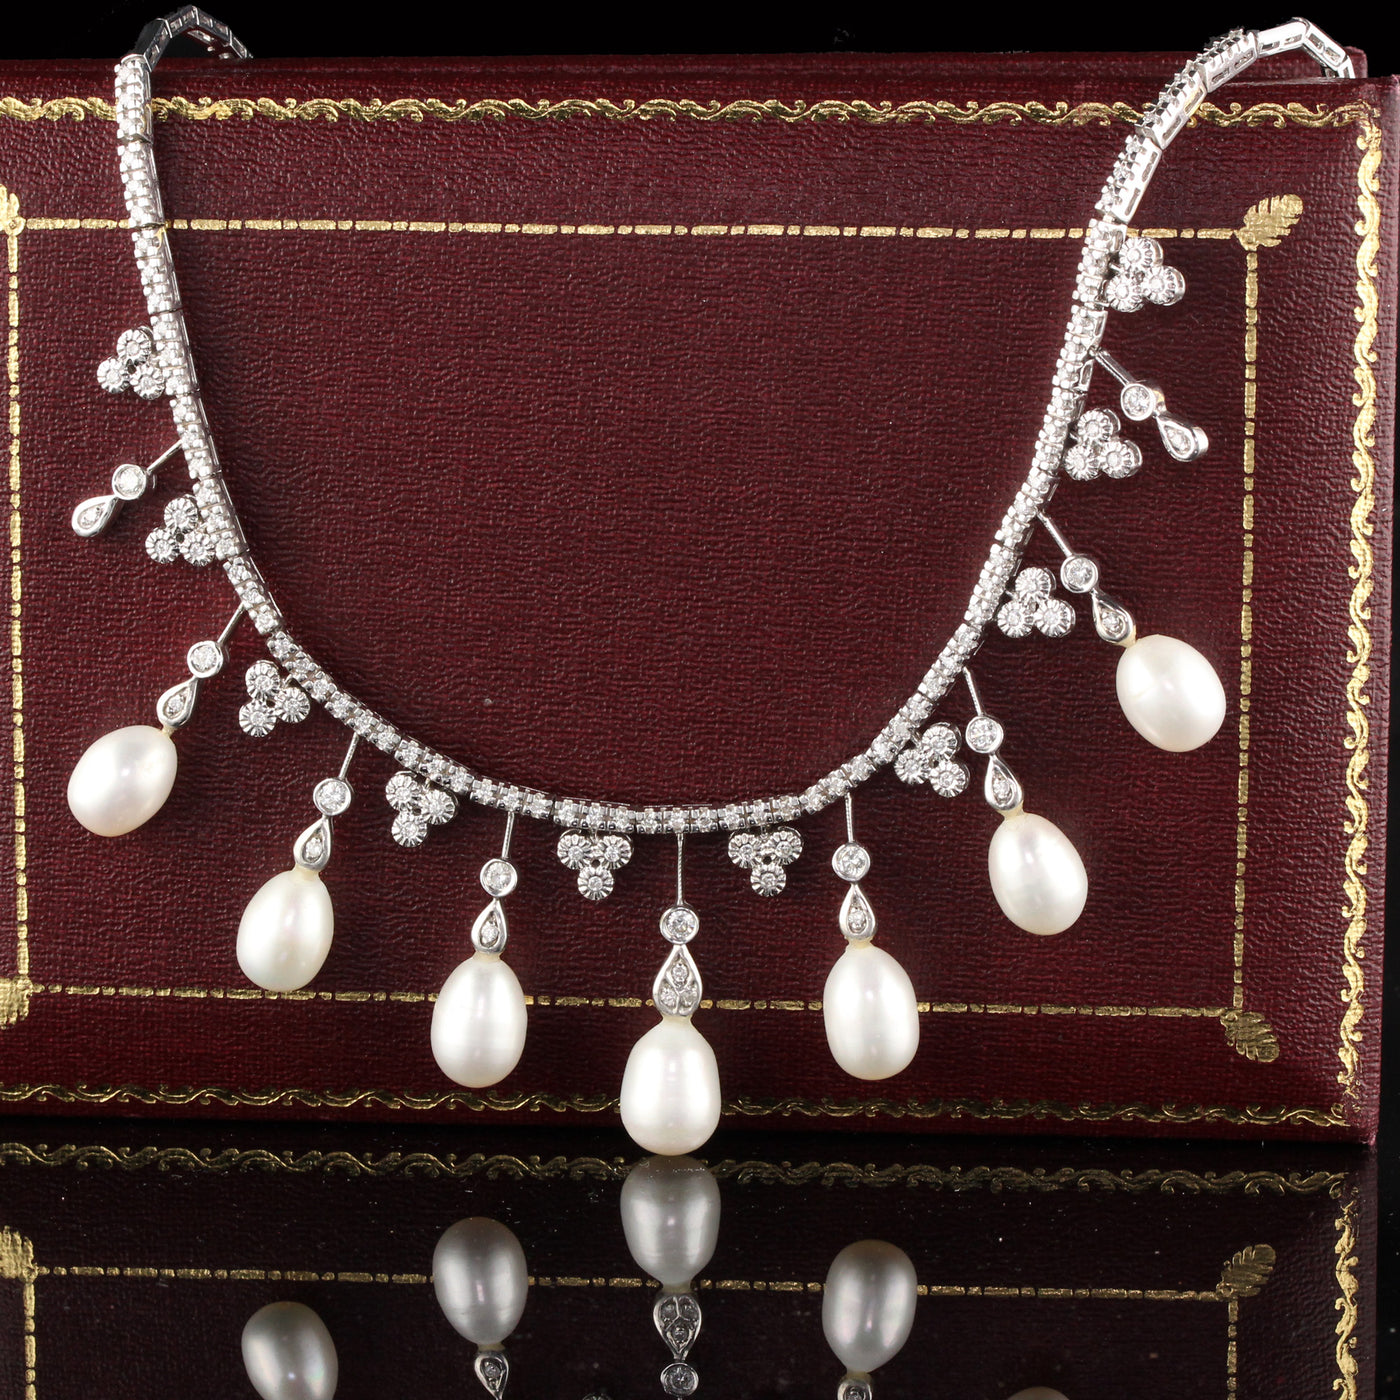 Vintage Estate 14K White Gold Diamond and Pearl Necklace